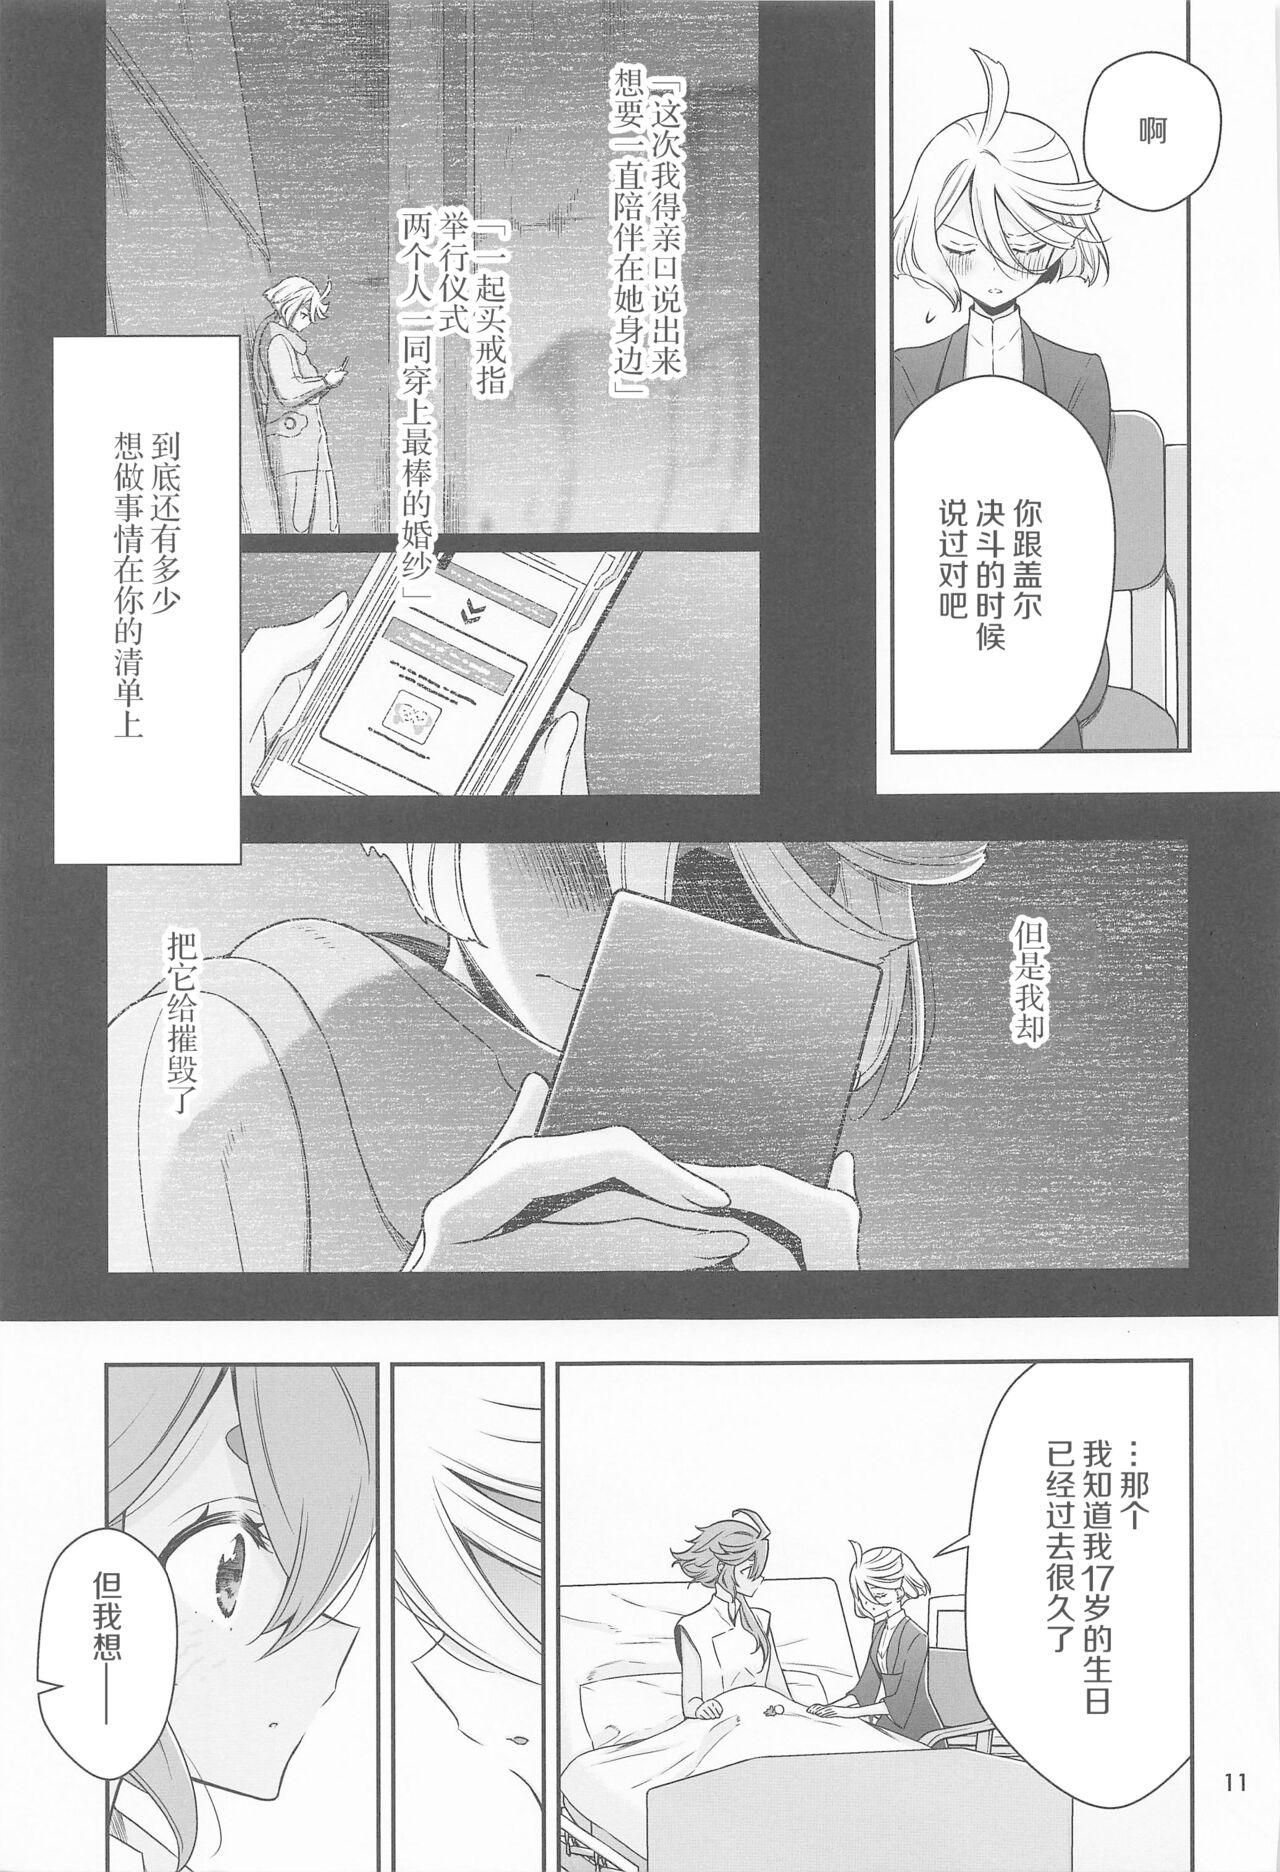 Gostosa Shukufuku no Hi | 祝福之日 - Mobile suit gundam the witch from mercury Orgasms - Page 11